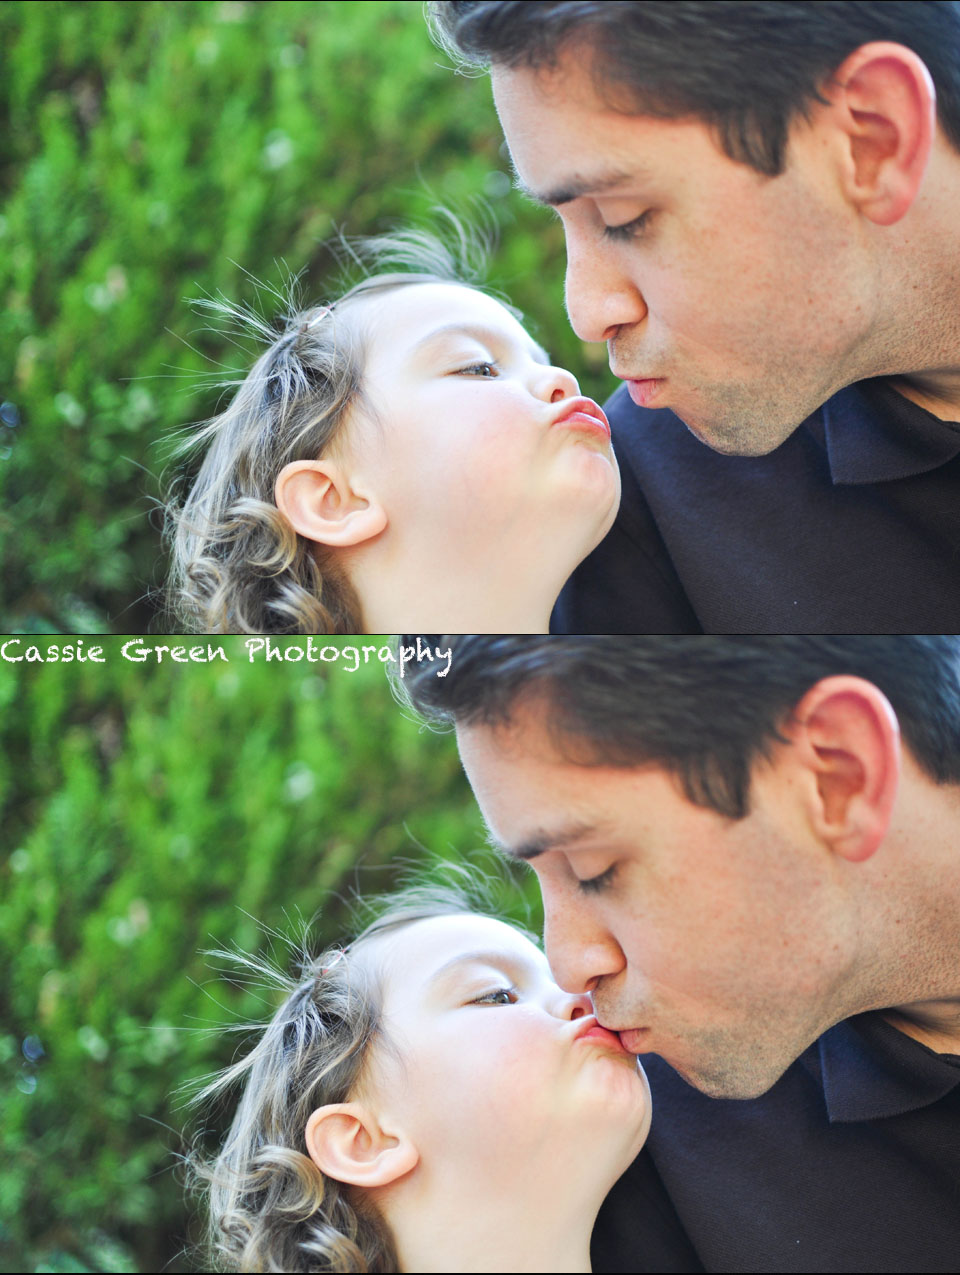 Daddy kisses daughter